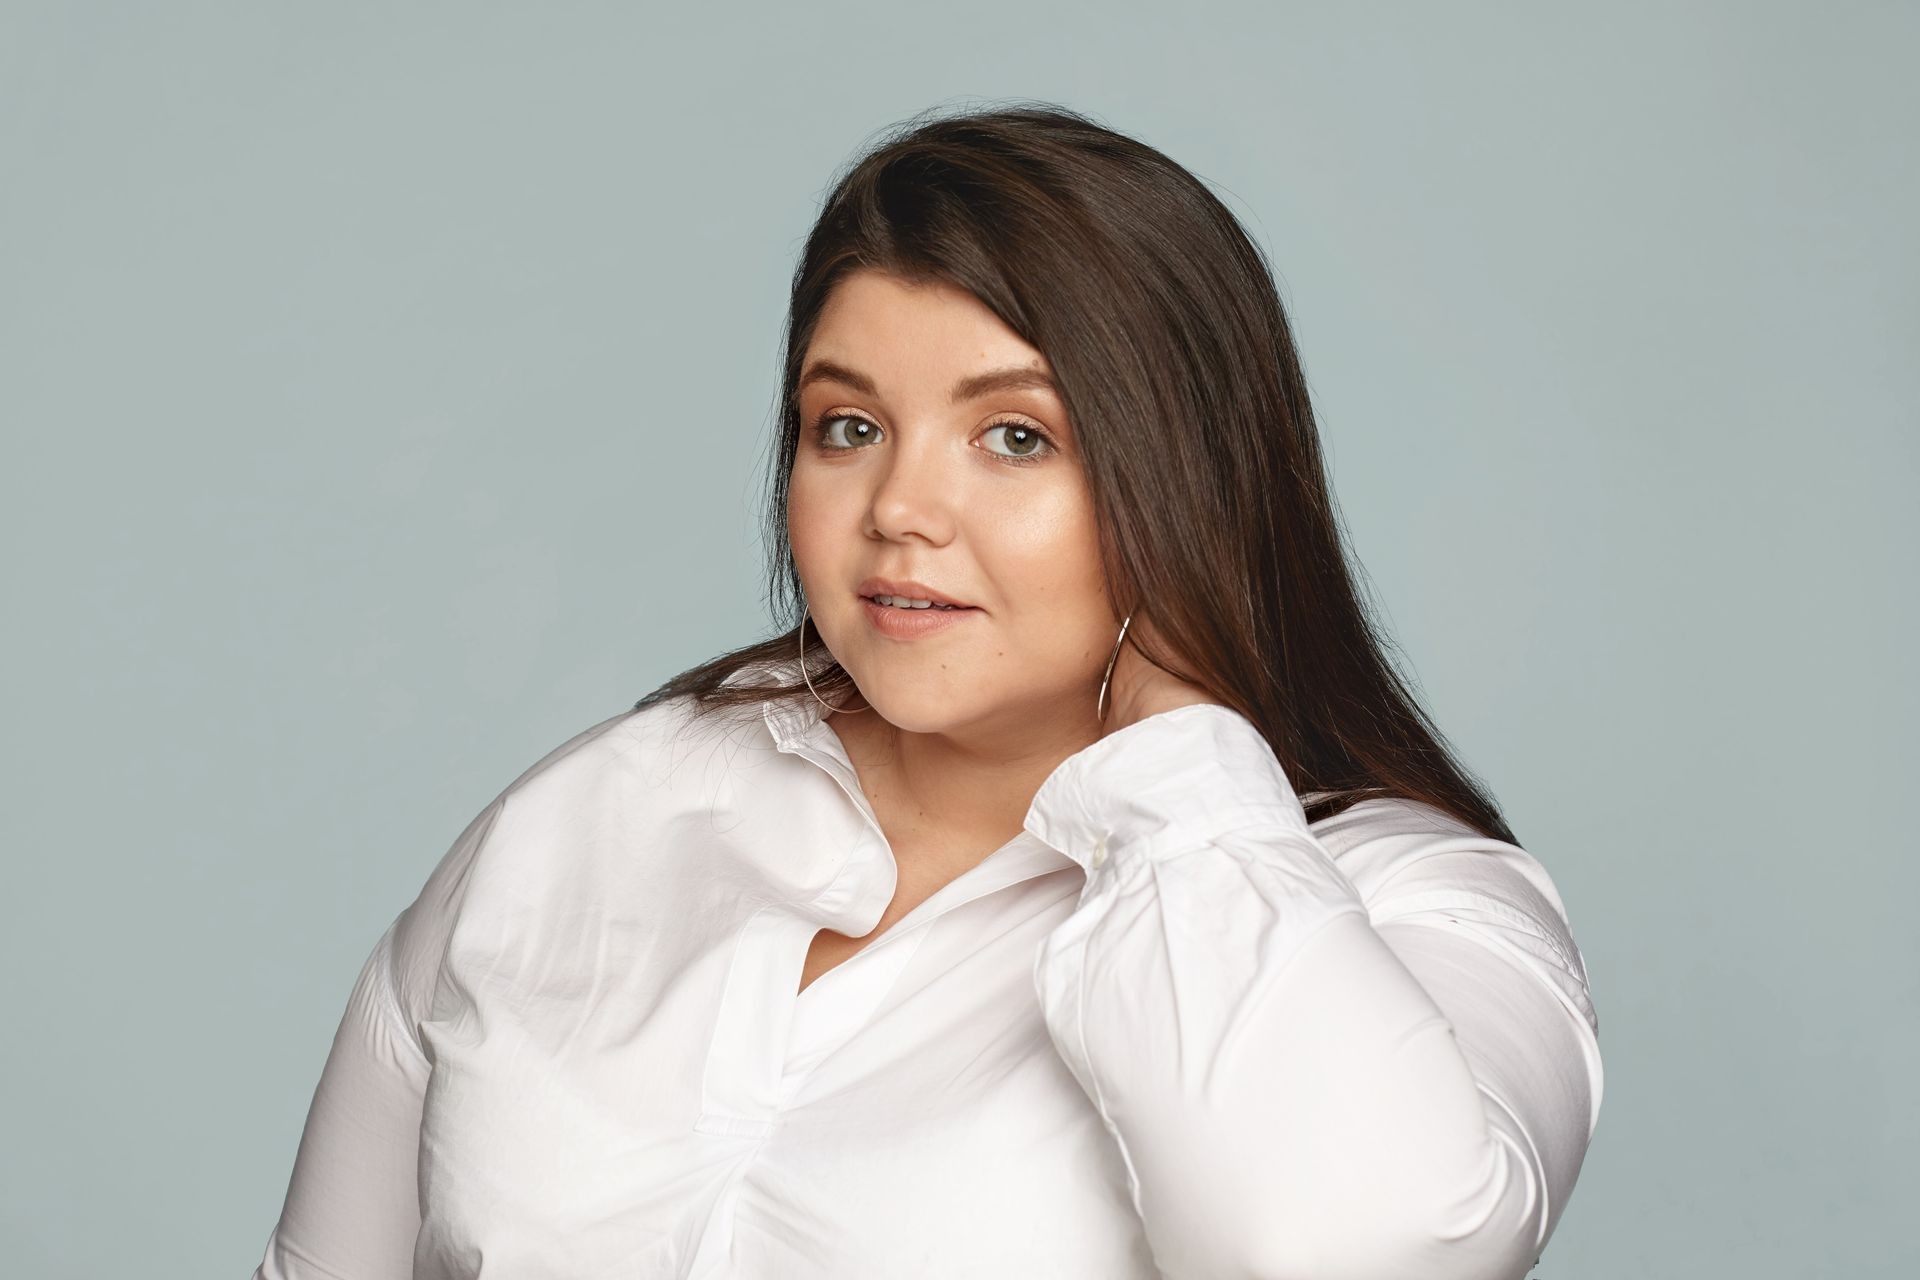 Picture of stylish young overweight female employee wearing white shirt and large round earrings touching her neck. Neat beautiful chubby woman posing against gray scopyspace tudio wall background